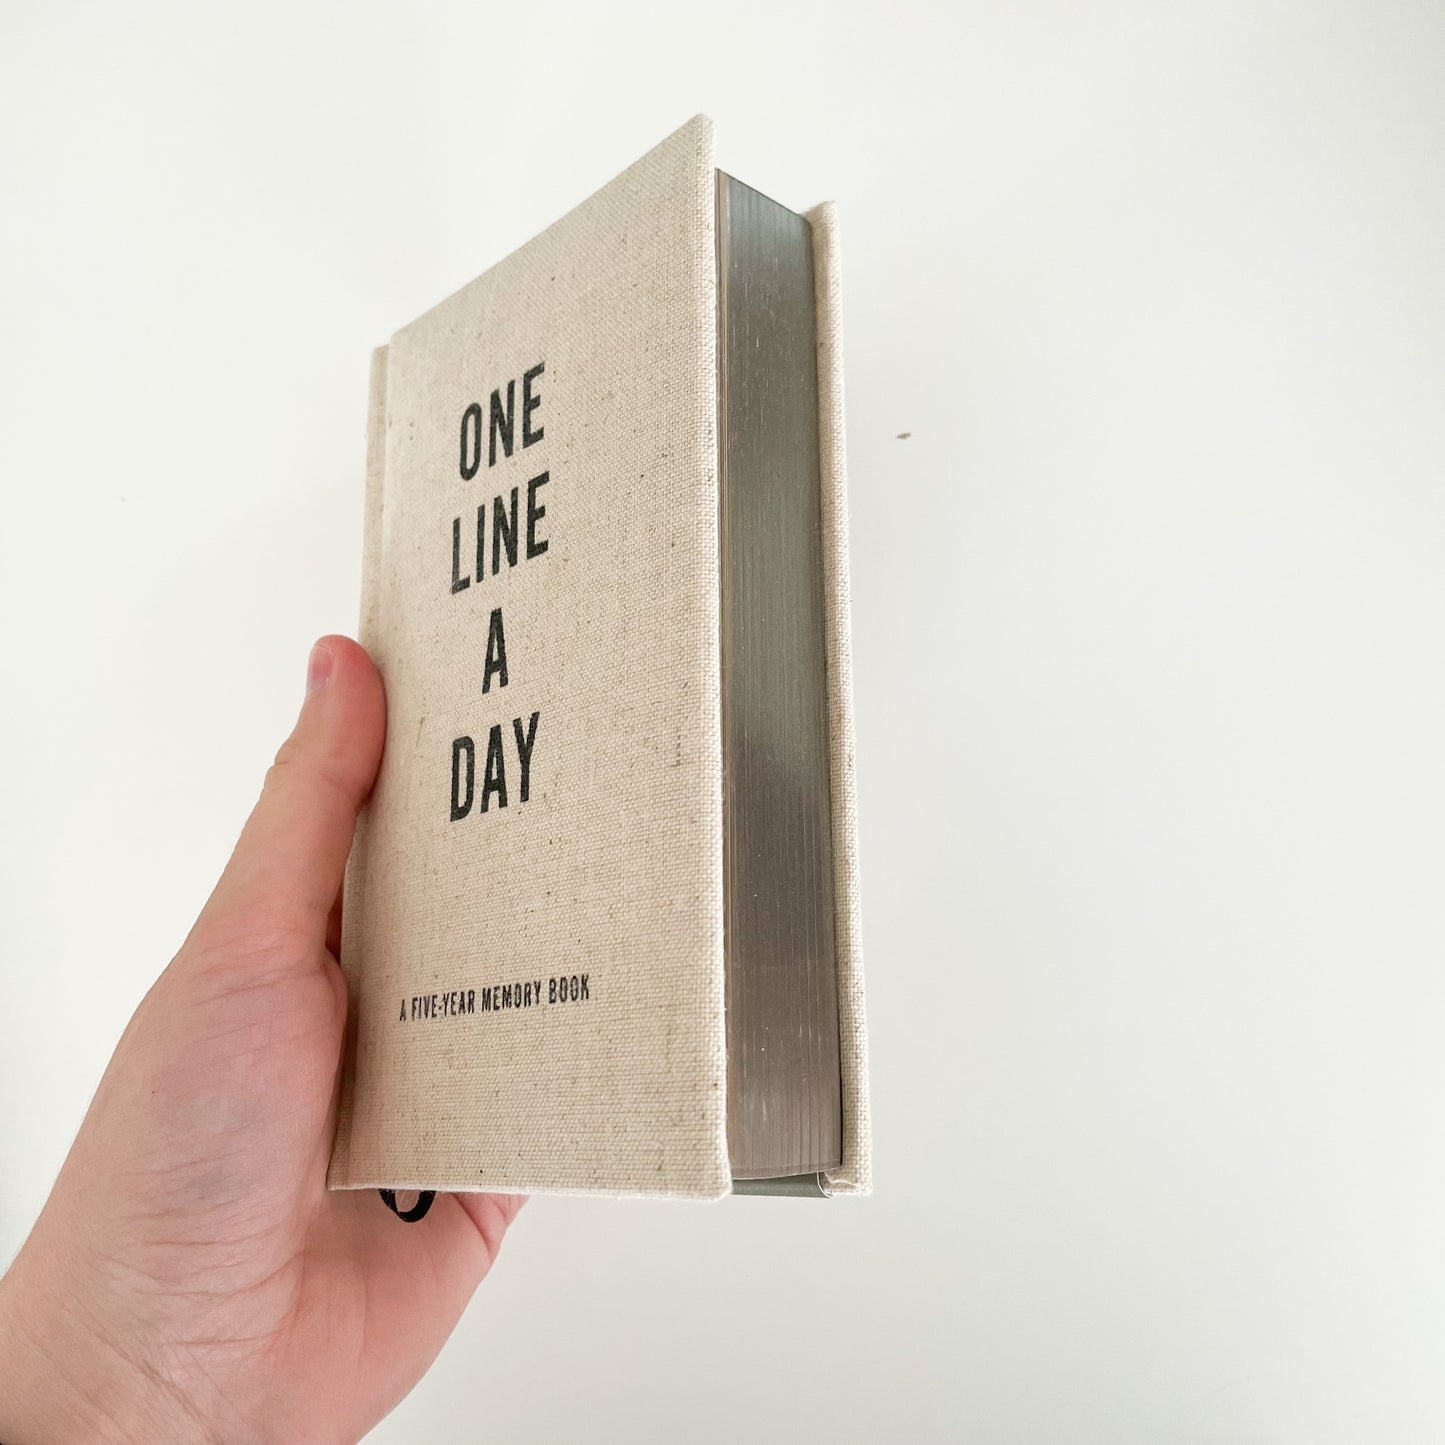 One Line a Day: A Five-Year Memory Journals